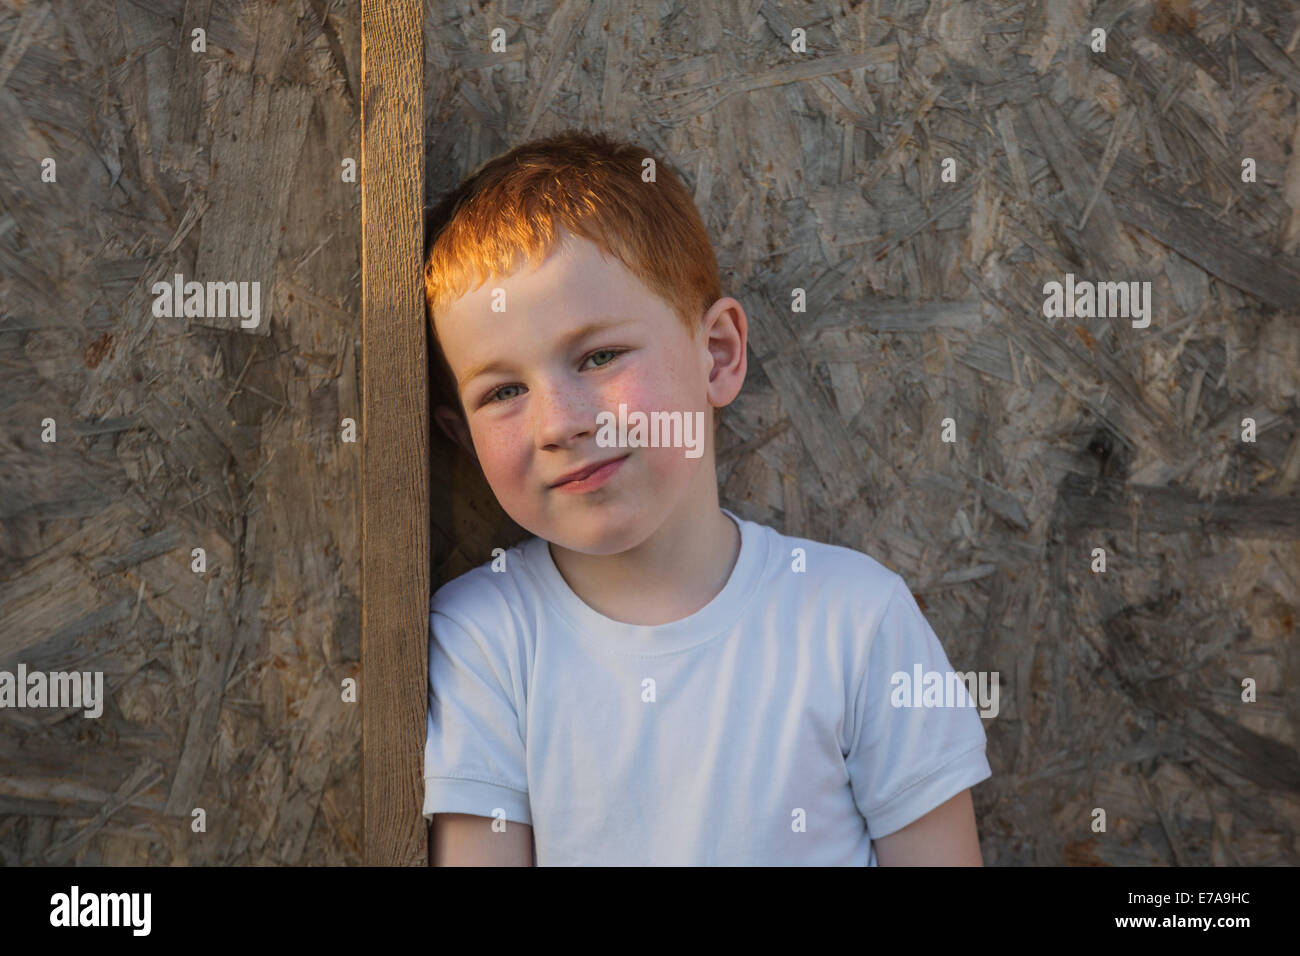 Portrait of young boy leaning on wooden plank Banque D'Images